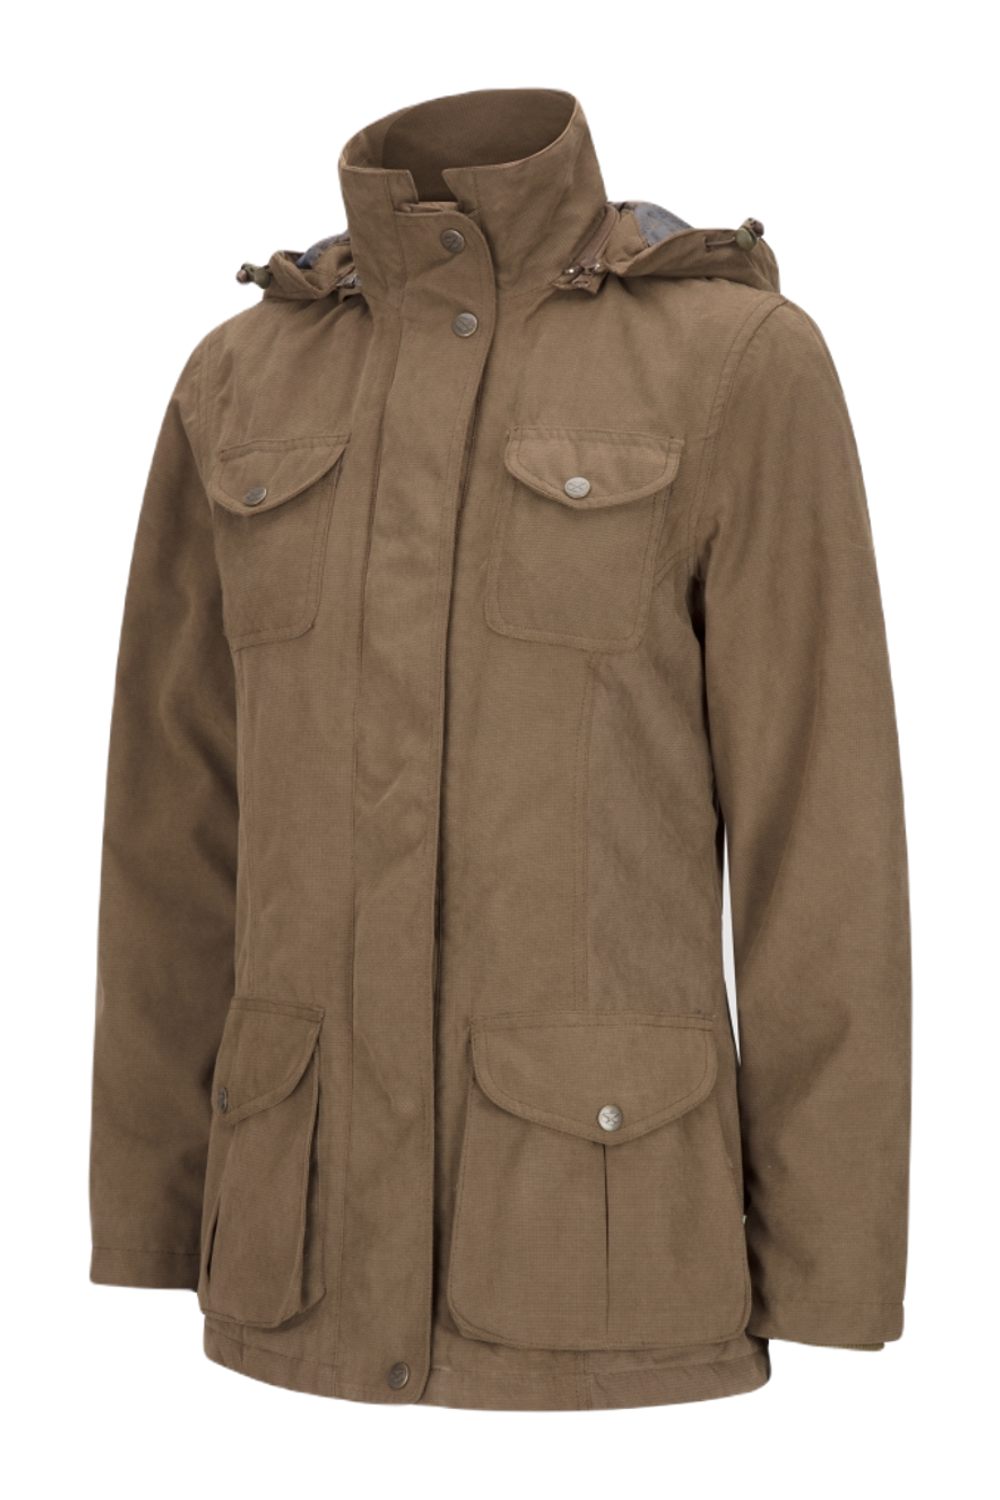 Hoggs of Fife Struther Ladies Field Coat (with hood) in Sage 